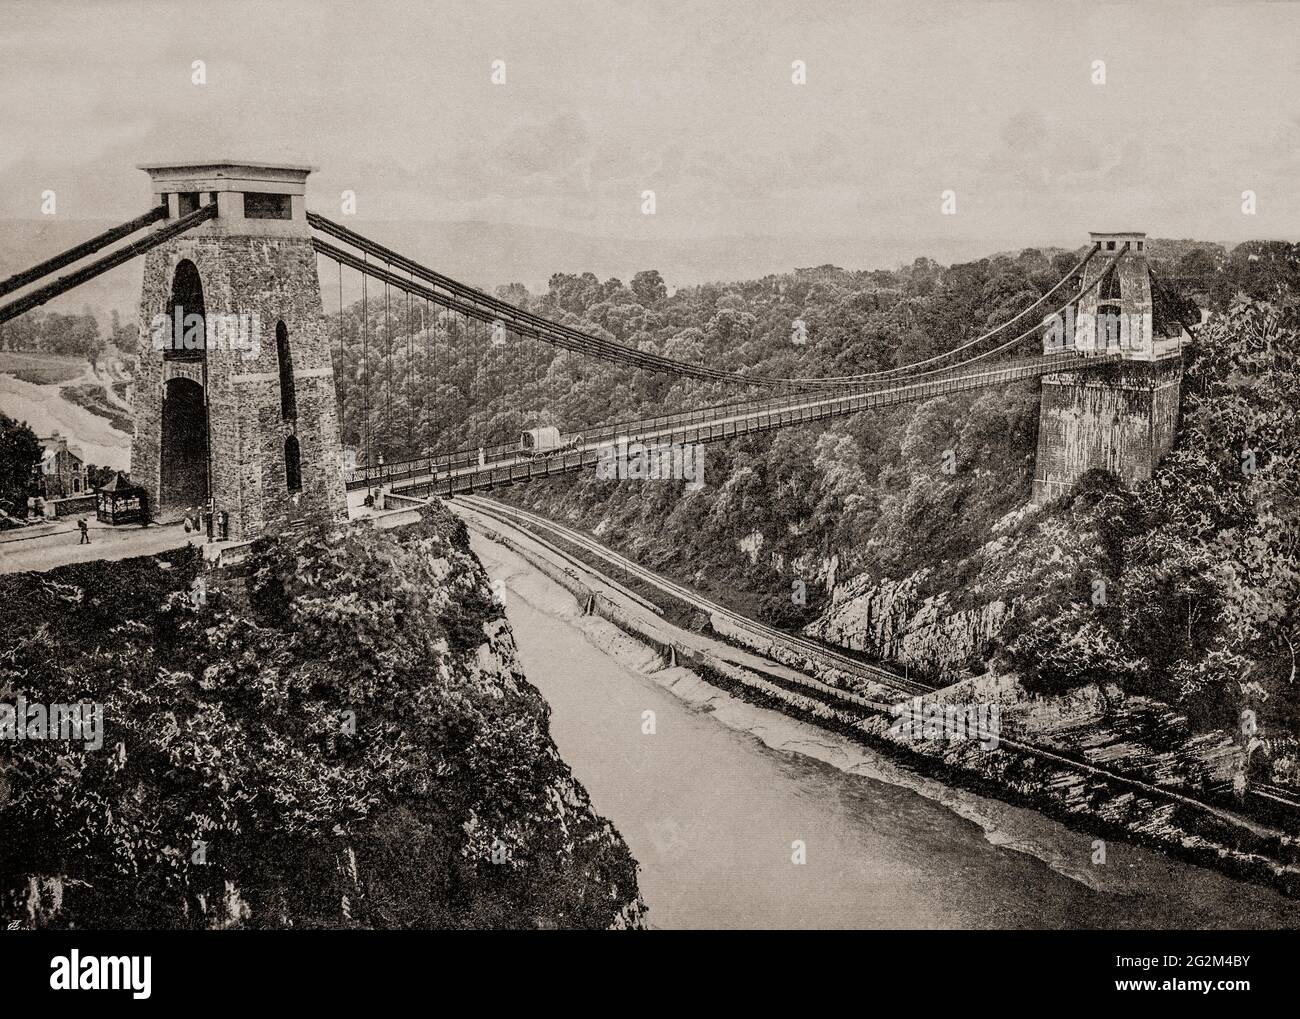 A late 19th century view of a horse and cart crossing the Clifton Suspension Bridge spanning the Avon Gorge and the River Avon, linking Clifton in Bristol to Leigh Woods in North Somerset. Since opening in 1864, it has been a toll bridge, the income from which provides funds for its maintenance. The bridge was built to a design by William Henry Barlow and John Hawkshaw, based on an earlier design by Isambard Kingdom Brunel. Stock Photo